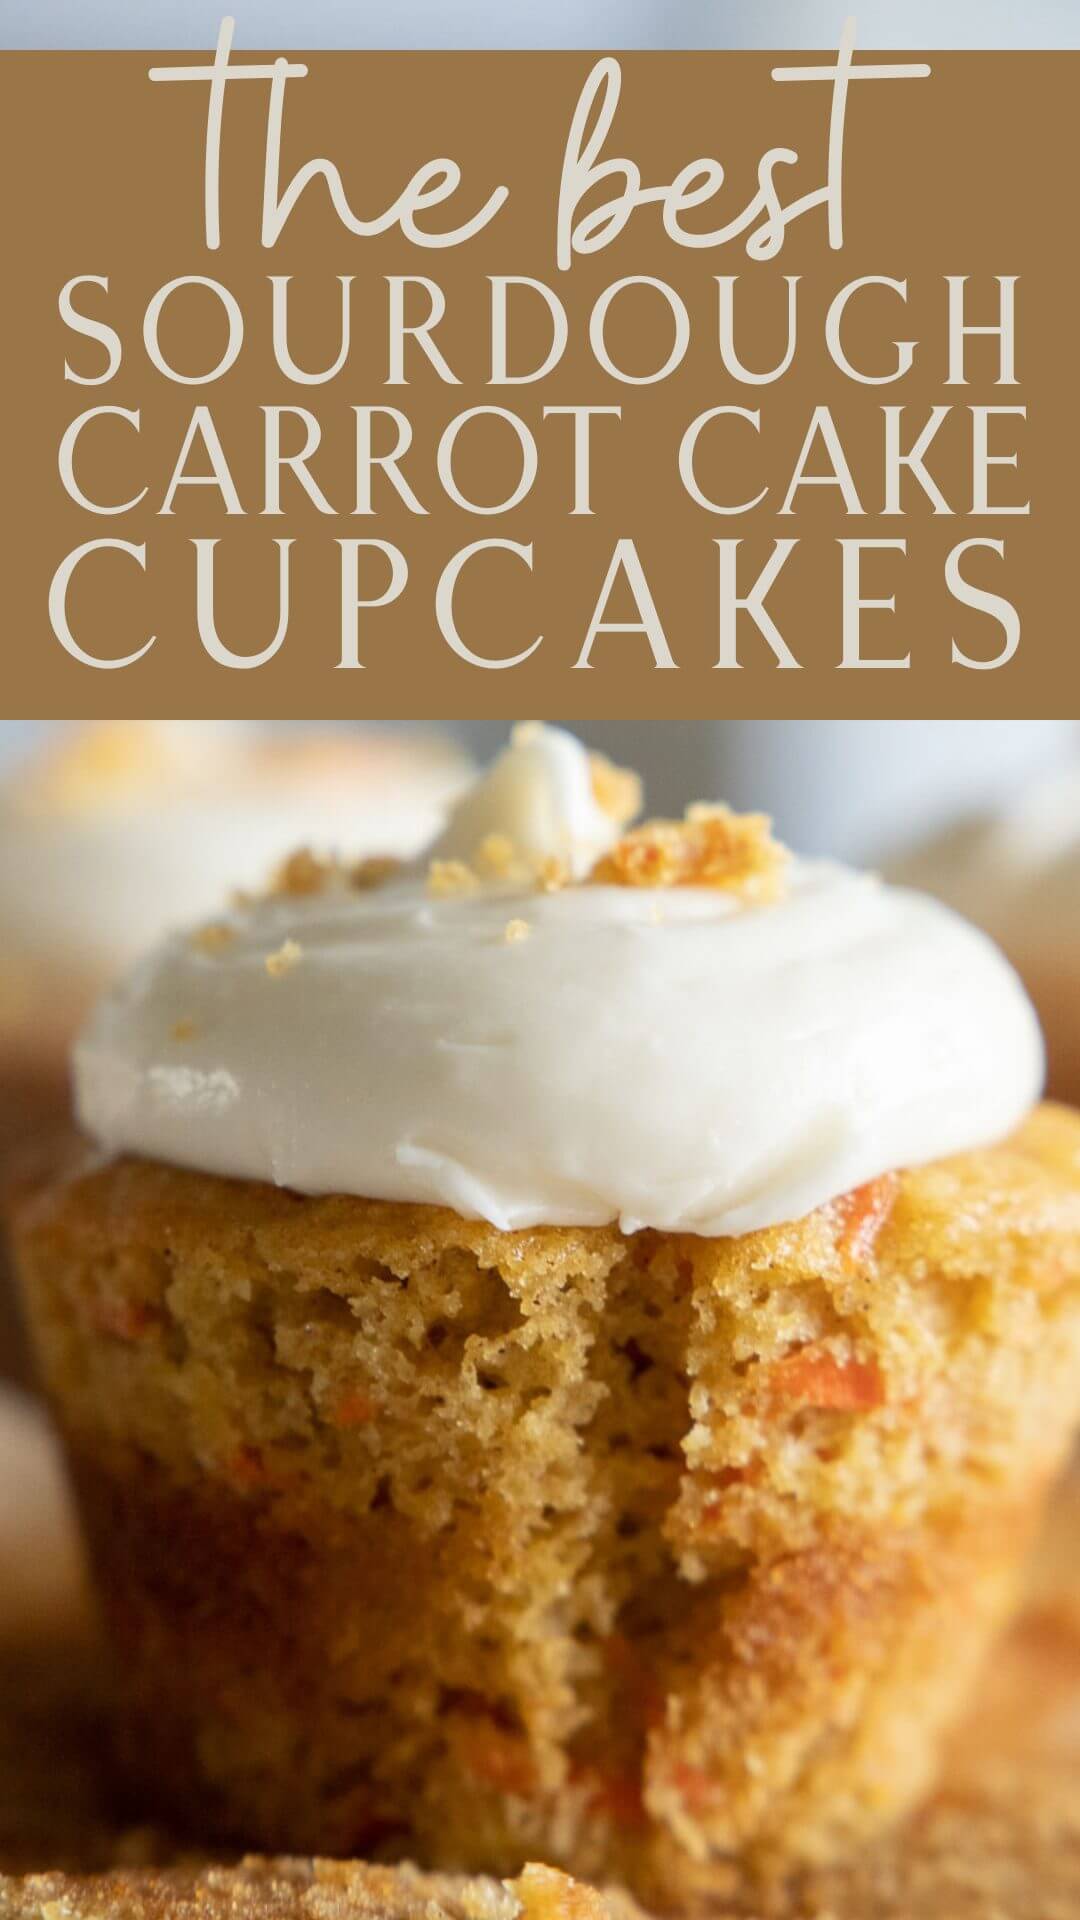 Make these easy sourdough carrot cake cupcakes today! These use sourdough discard to create moist,  flavorful carrot cupcakes.